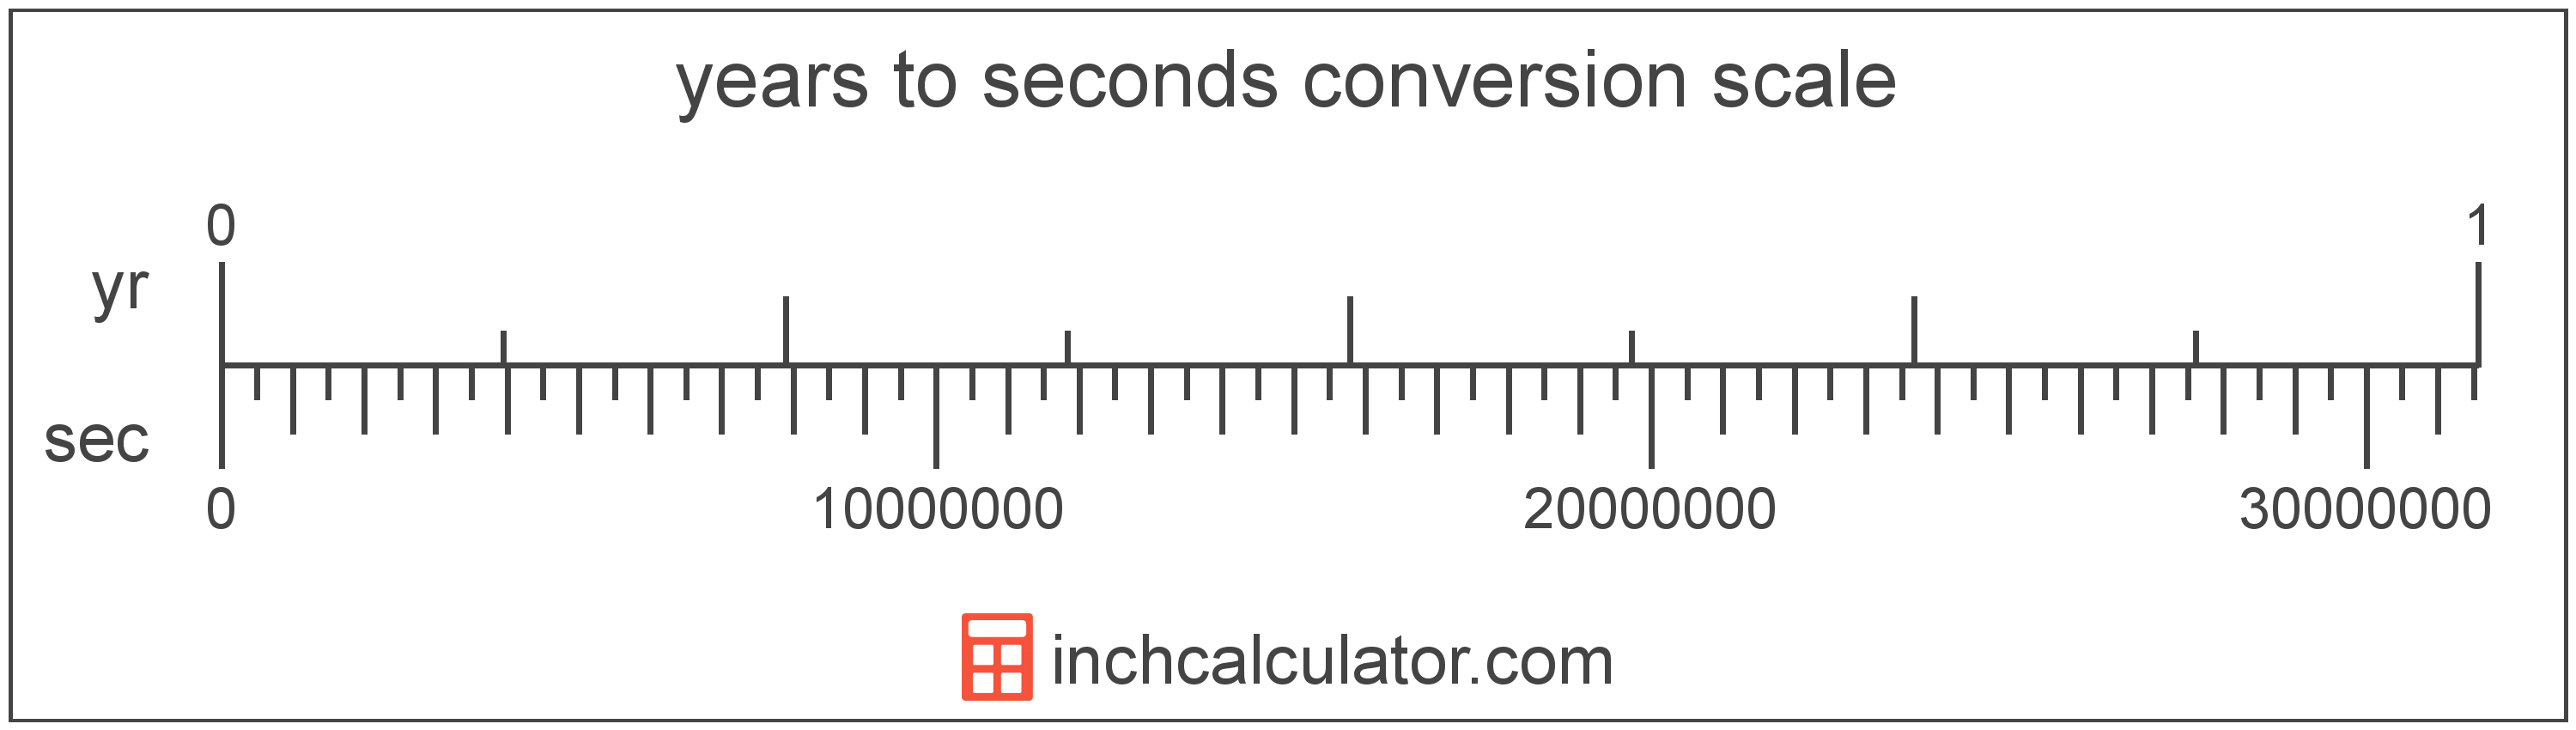 conversion scale showing seconds and equivalent years time values